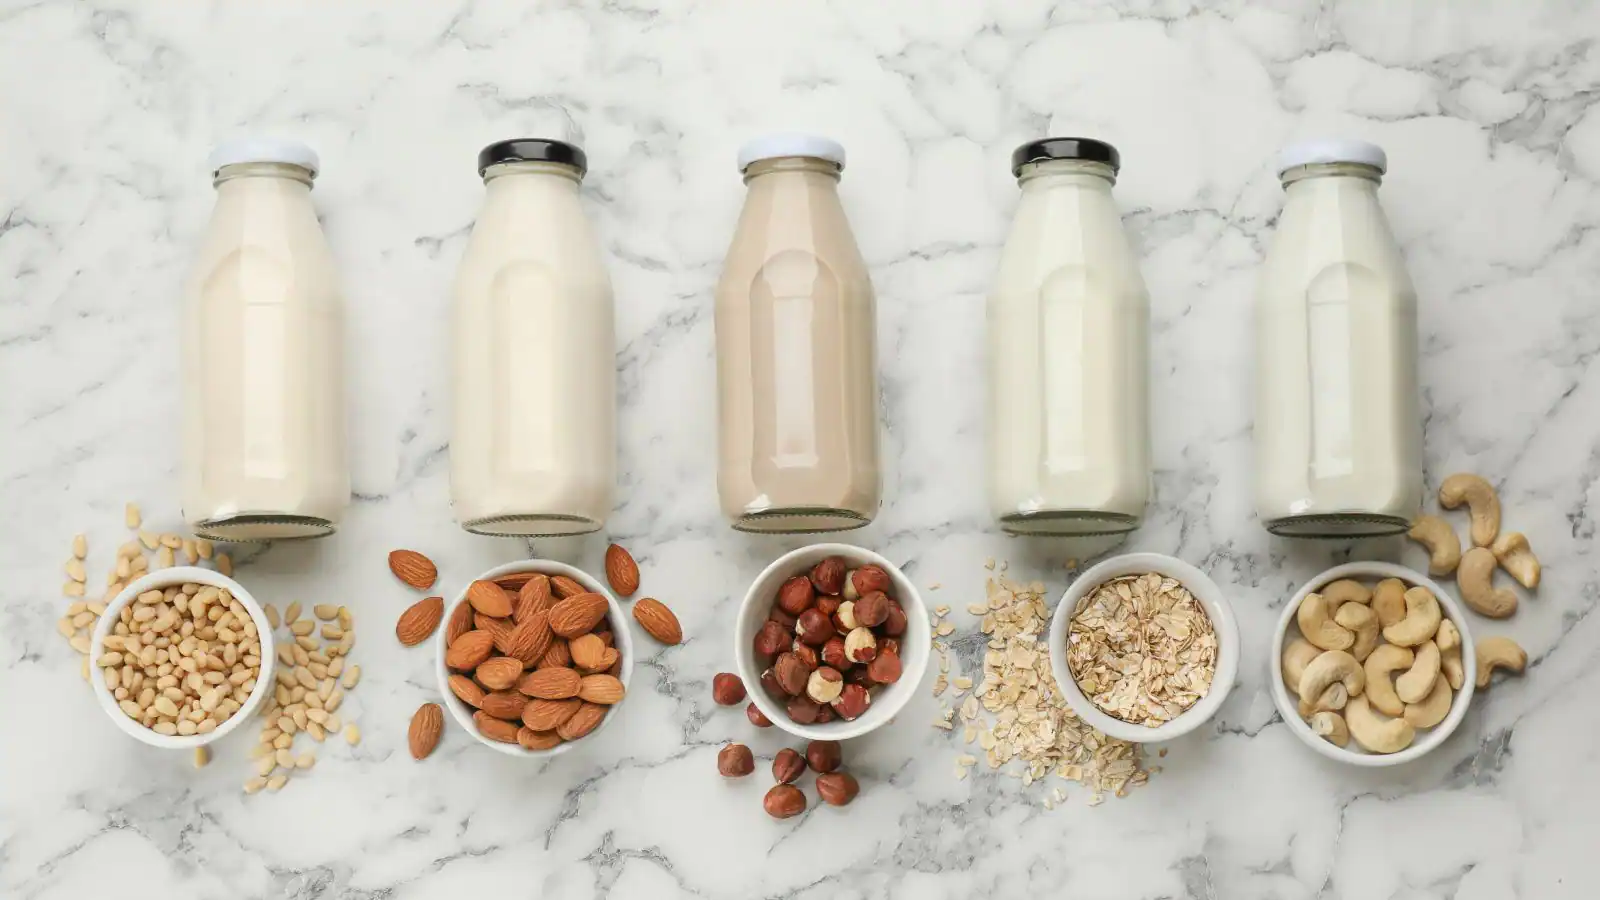 Discover the Best Milk Alternatives A Guide to Healthy Dairy-Free Options